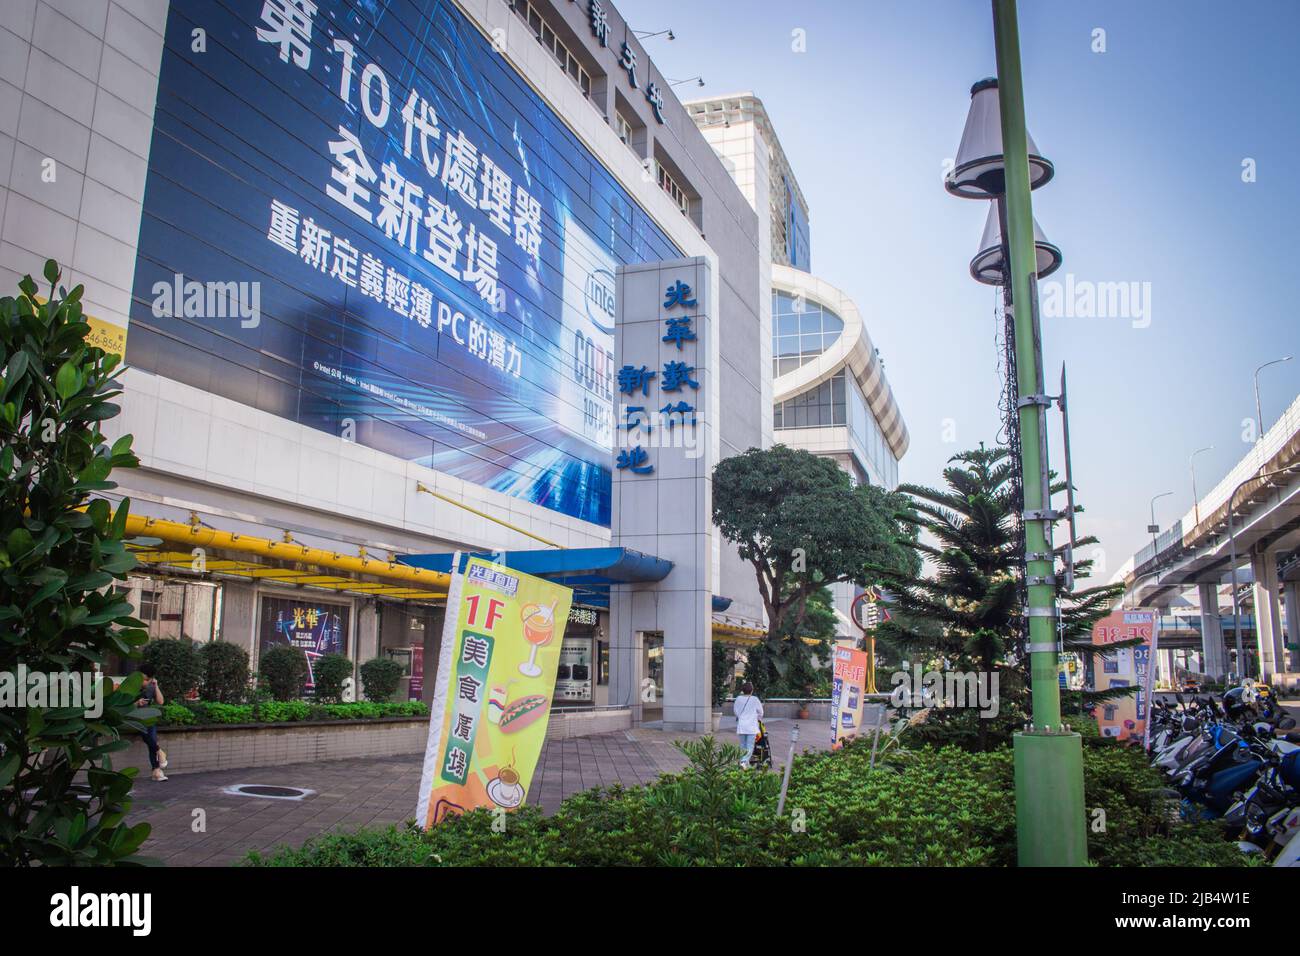 Guang Hua Digital Plaza. Guang Hua Market is a 6-story, indoor technological & electronics market at the intersection of the Zhongzheng & Daan Distric Stock Photo